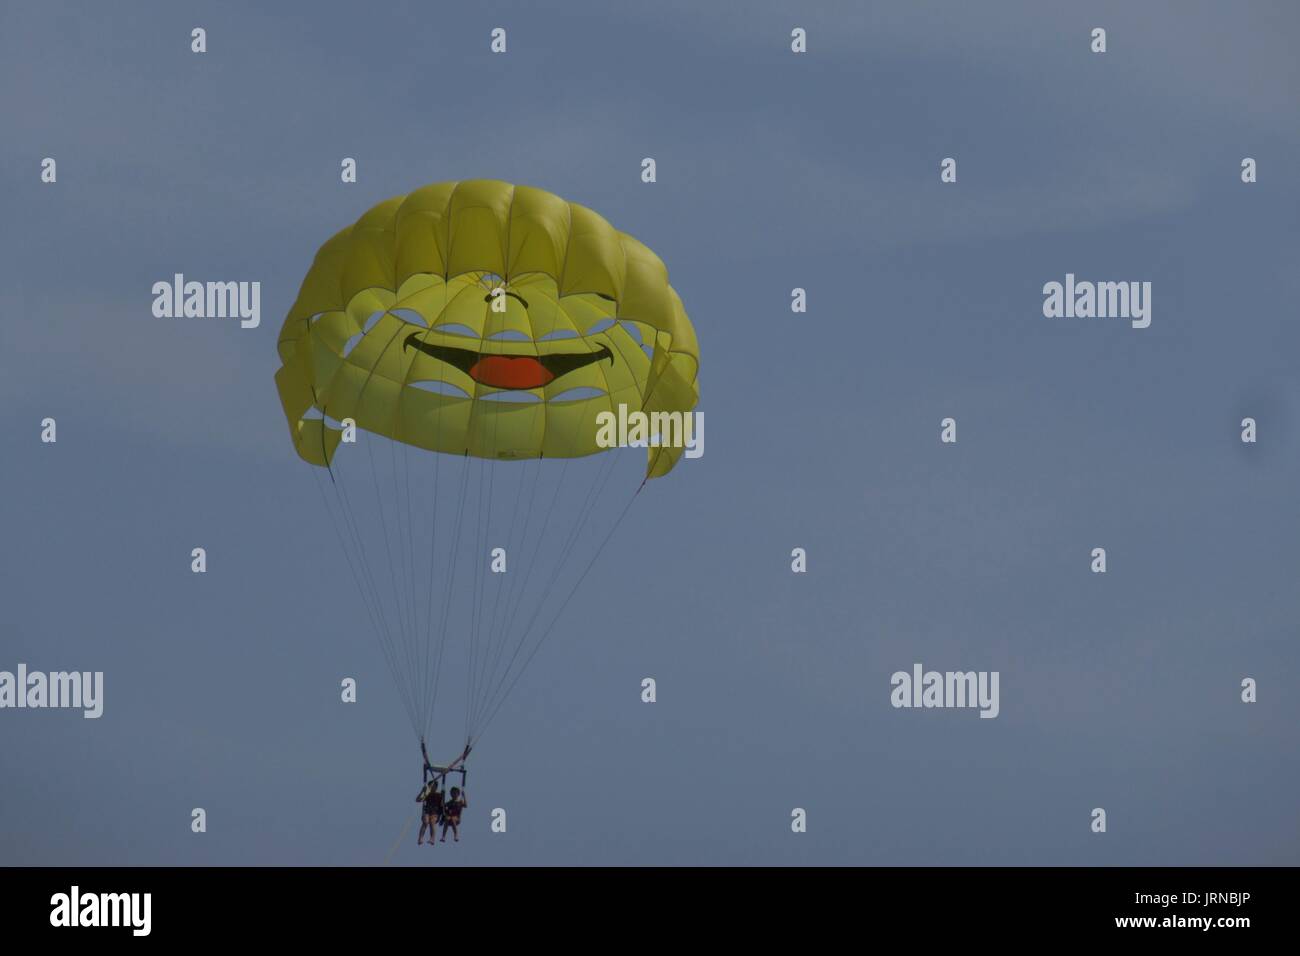 Parasailing with yellow smiley face parasail against cloudy sky, Nice, France Stock Photo